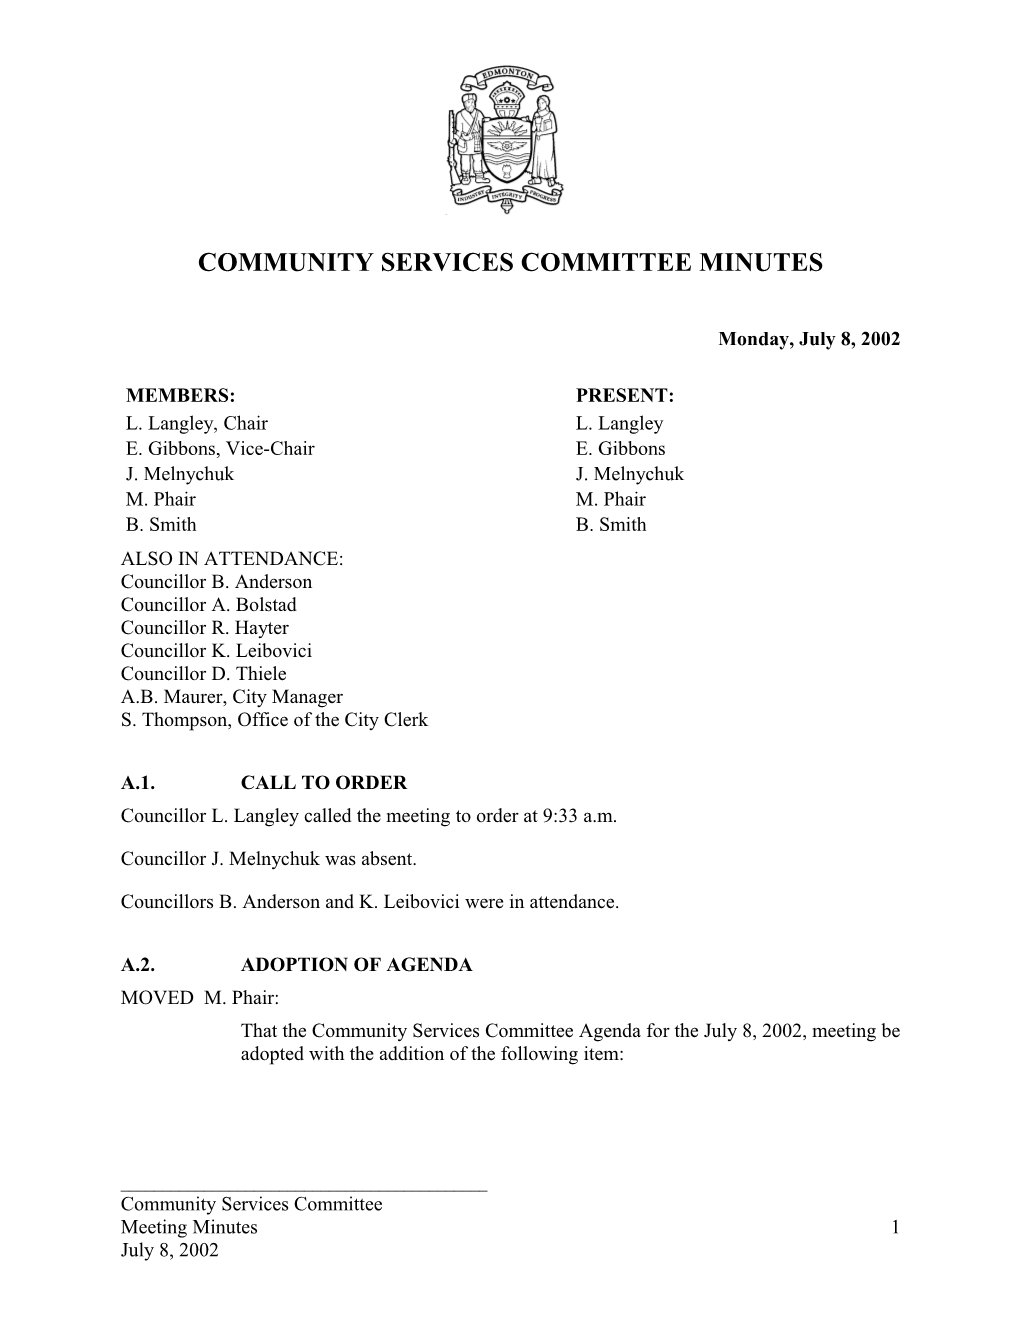 Minutes for Community Services Committee July 8, 2002 Meeting